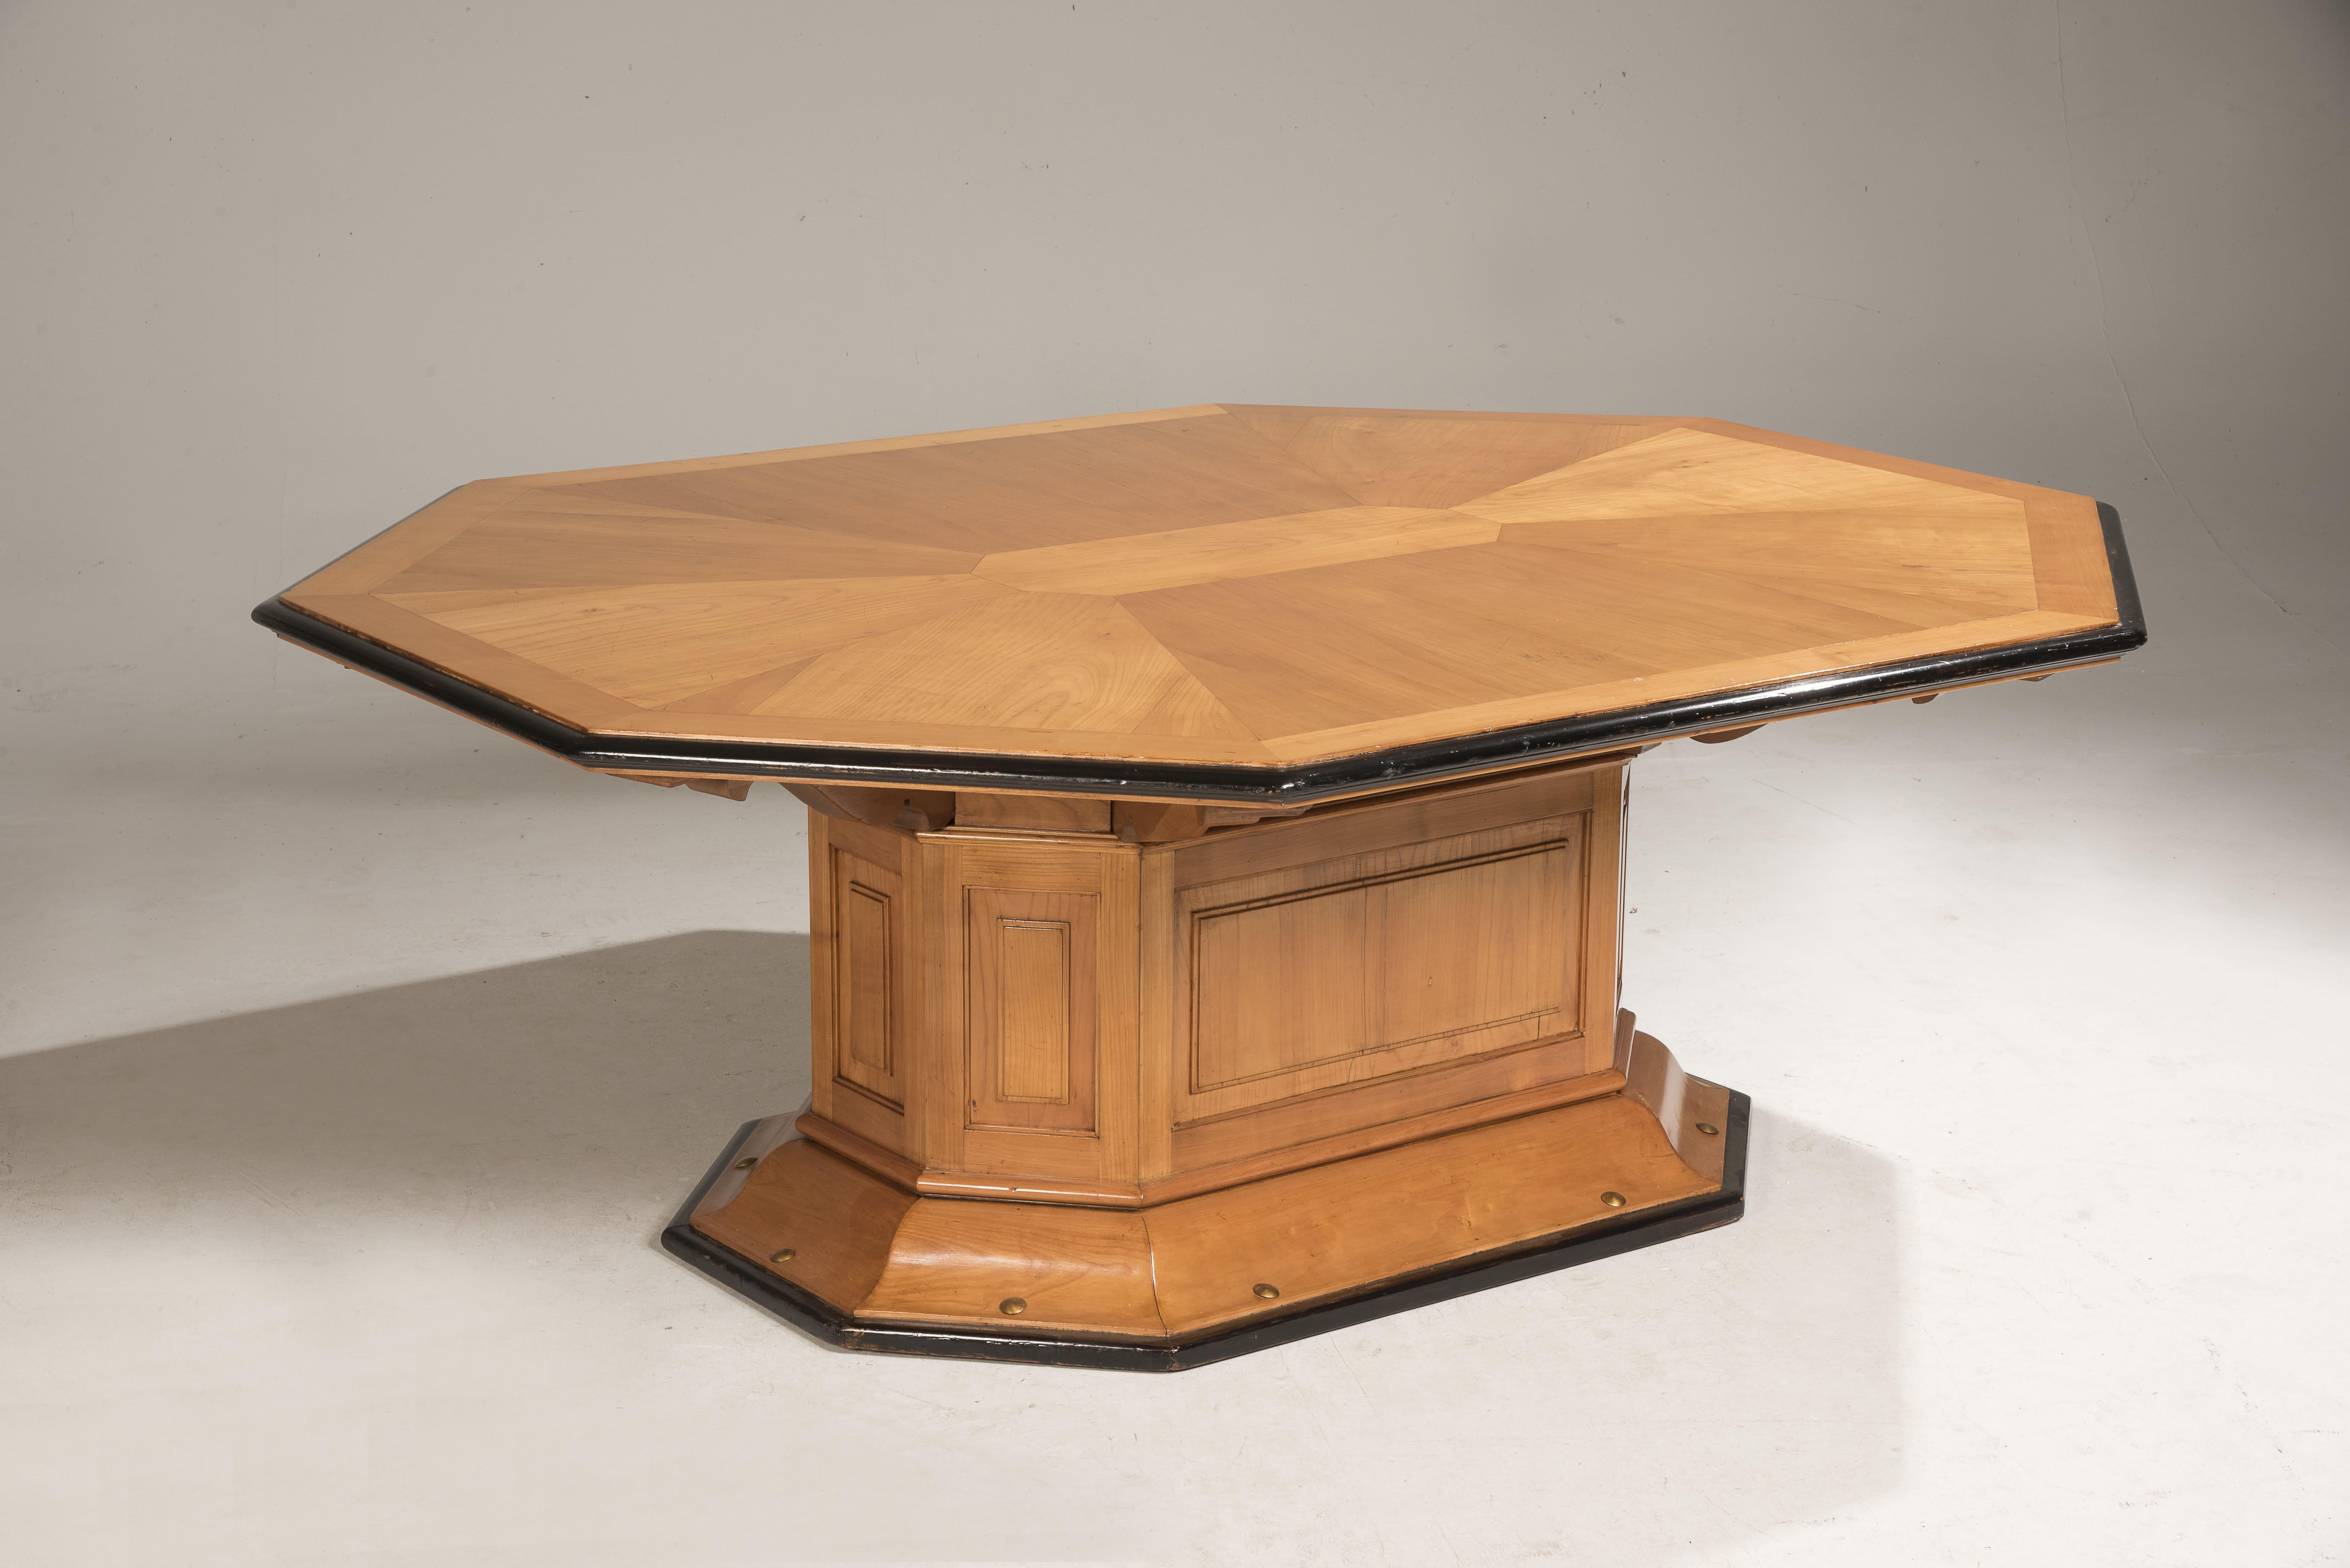 20th Century Art Deco Octagonal Cherrywood Table with Black Borders and Brass Details For Sale